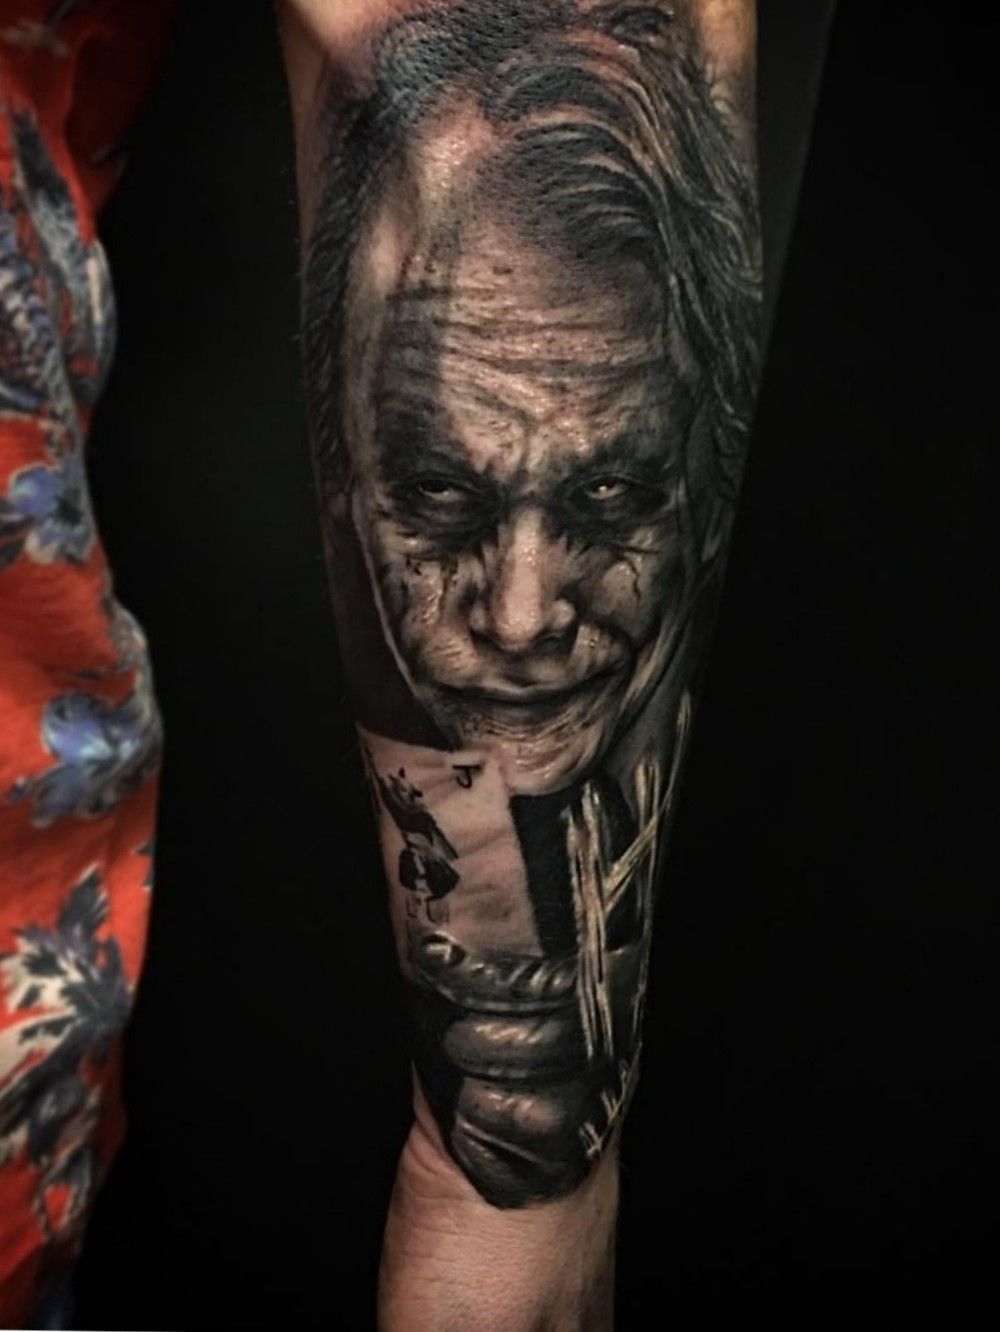 Reverence Tattoo Oakleigh  Batman  Joker mashup  For all enquiries  message us through email messenger or call the studio   Store  Oakleigh  Artist Andres  03 9570